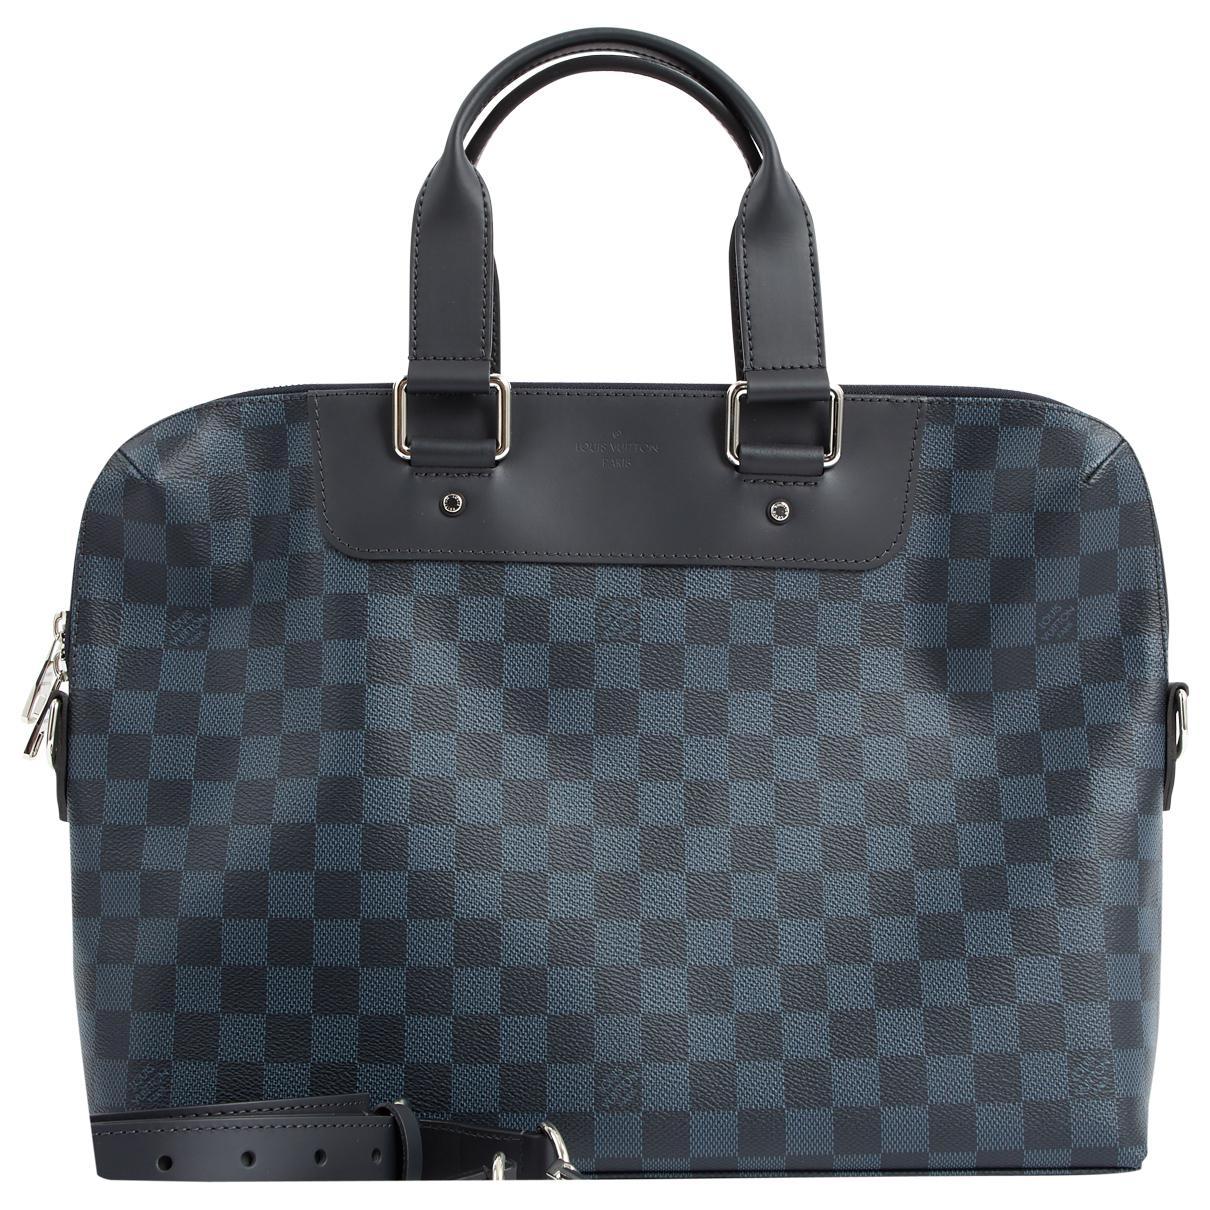 Louis Vuitton Grey Leather Bag in Gray for Men - Lyst